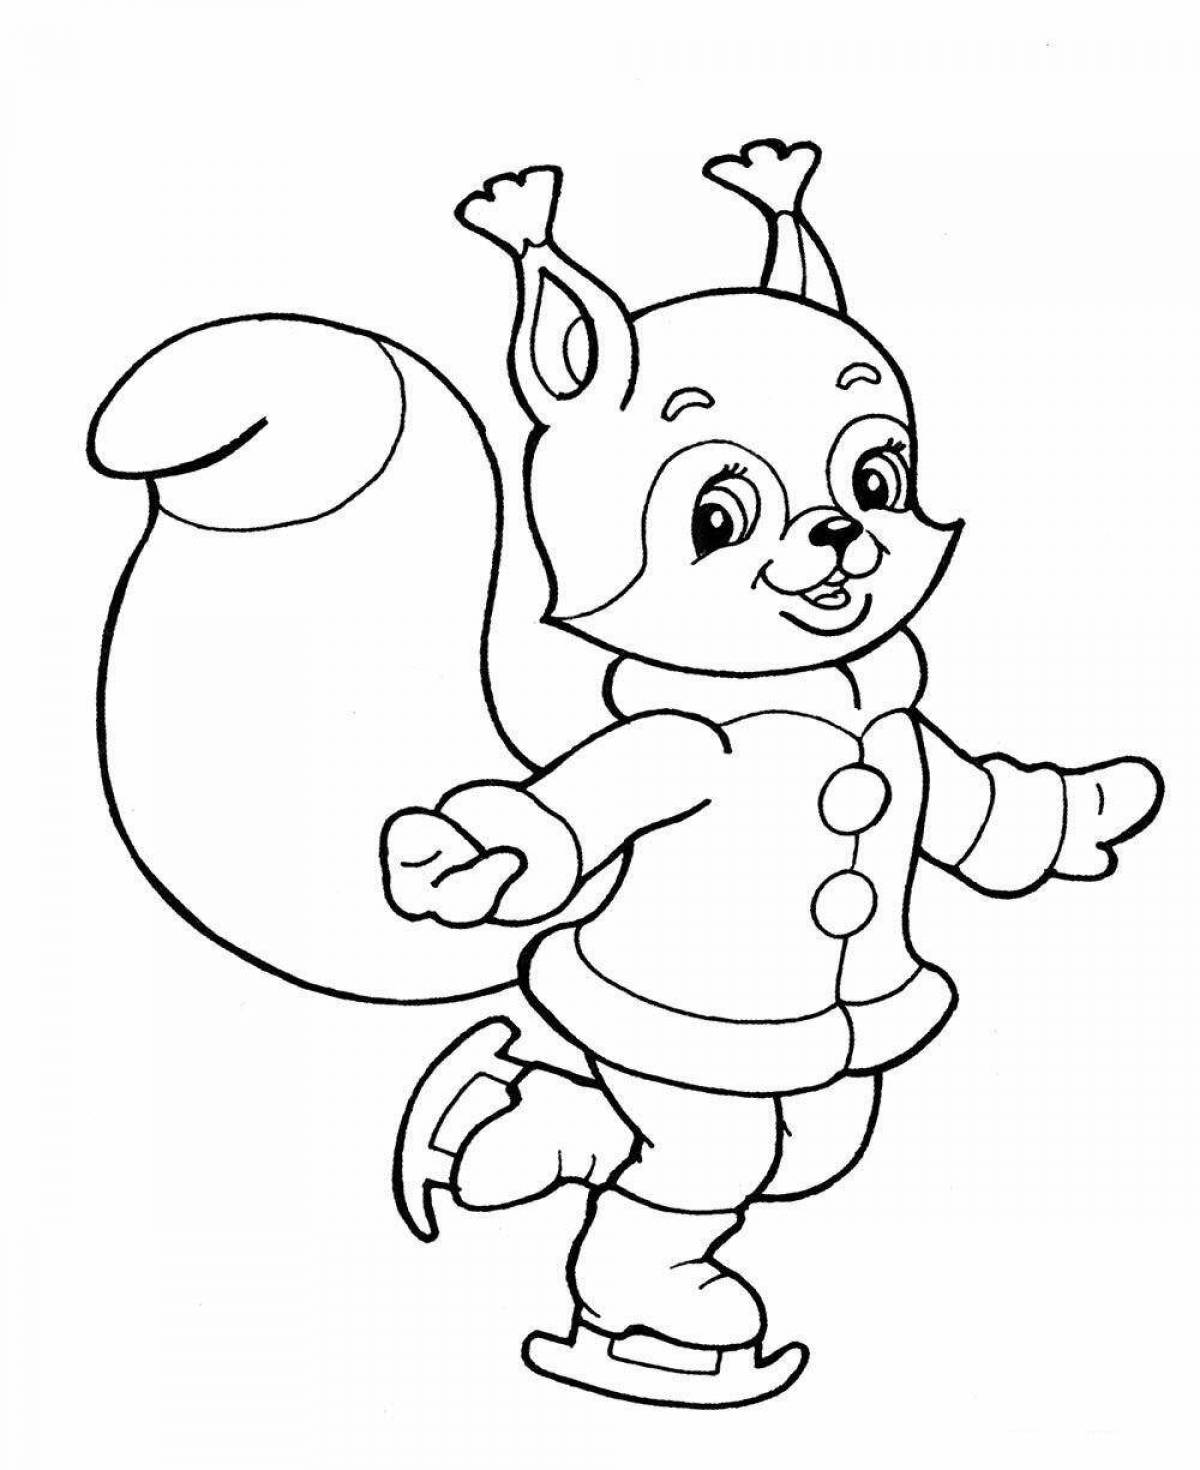 Naughty squirrel coloring book for 3-4 year olds